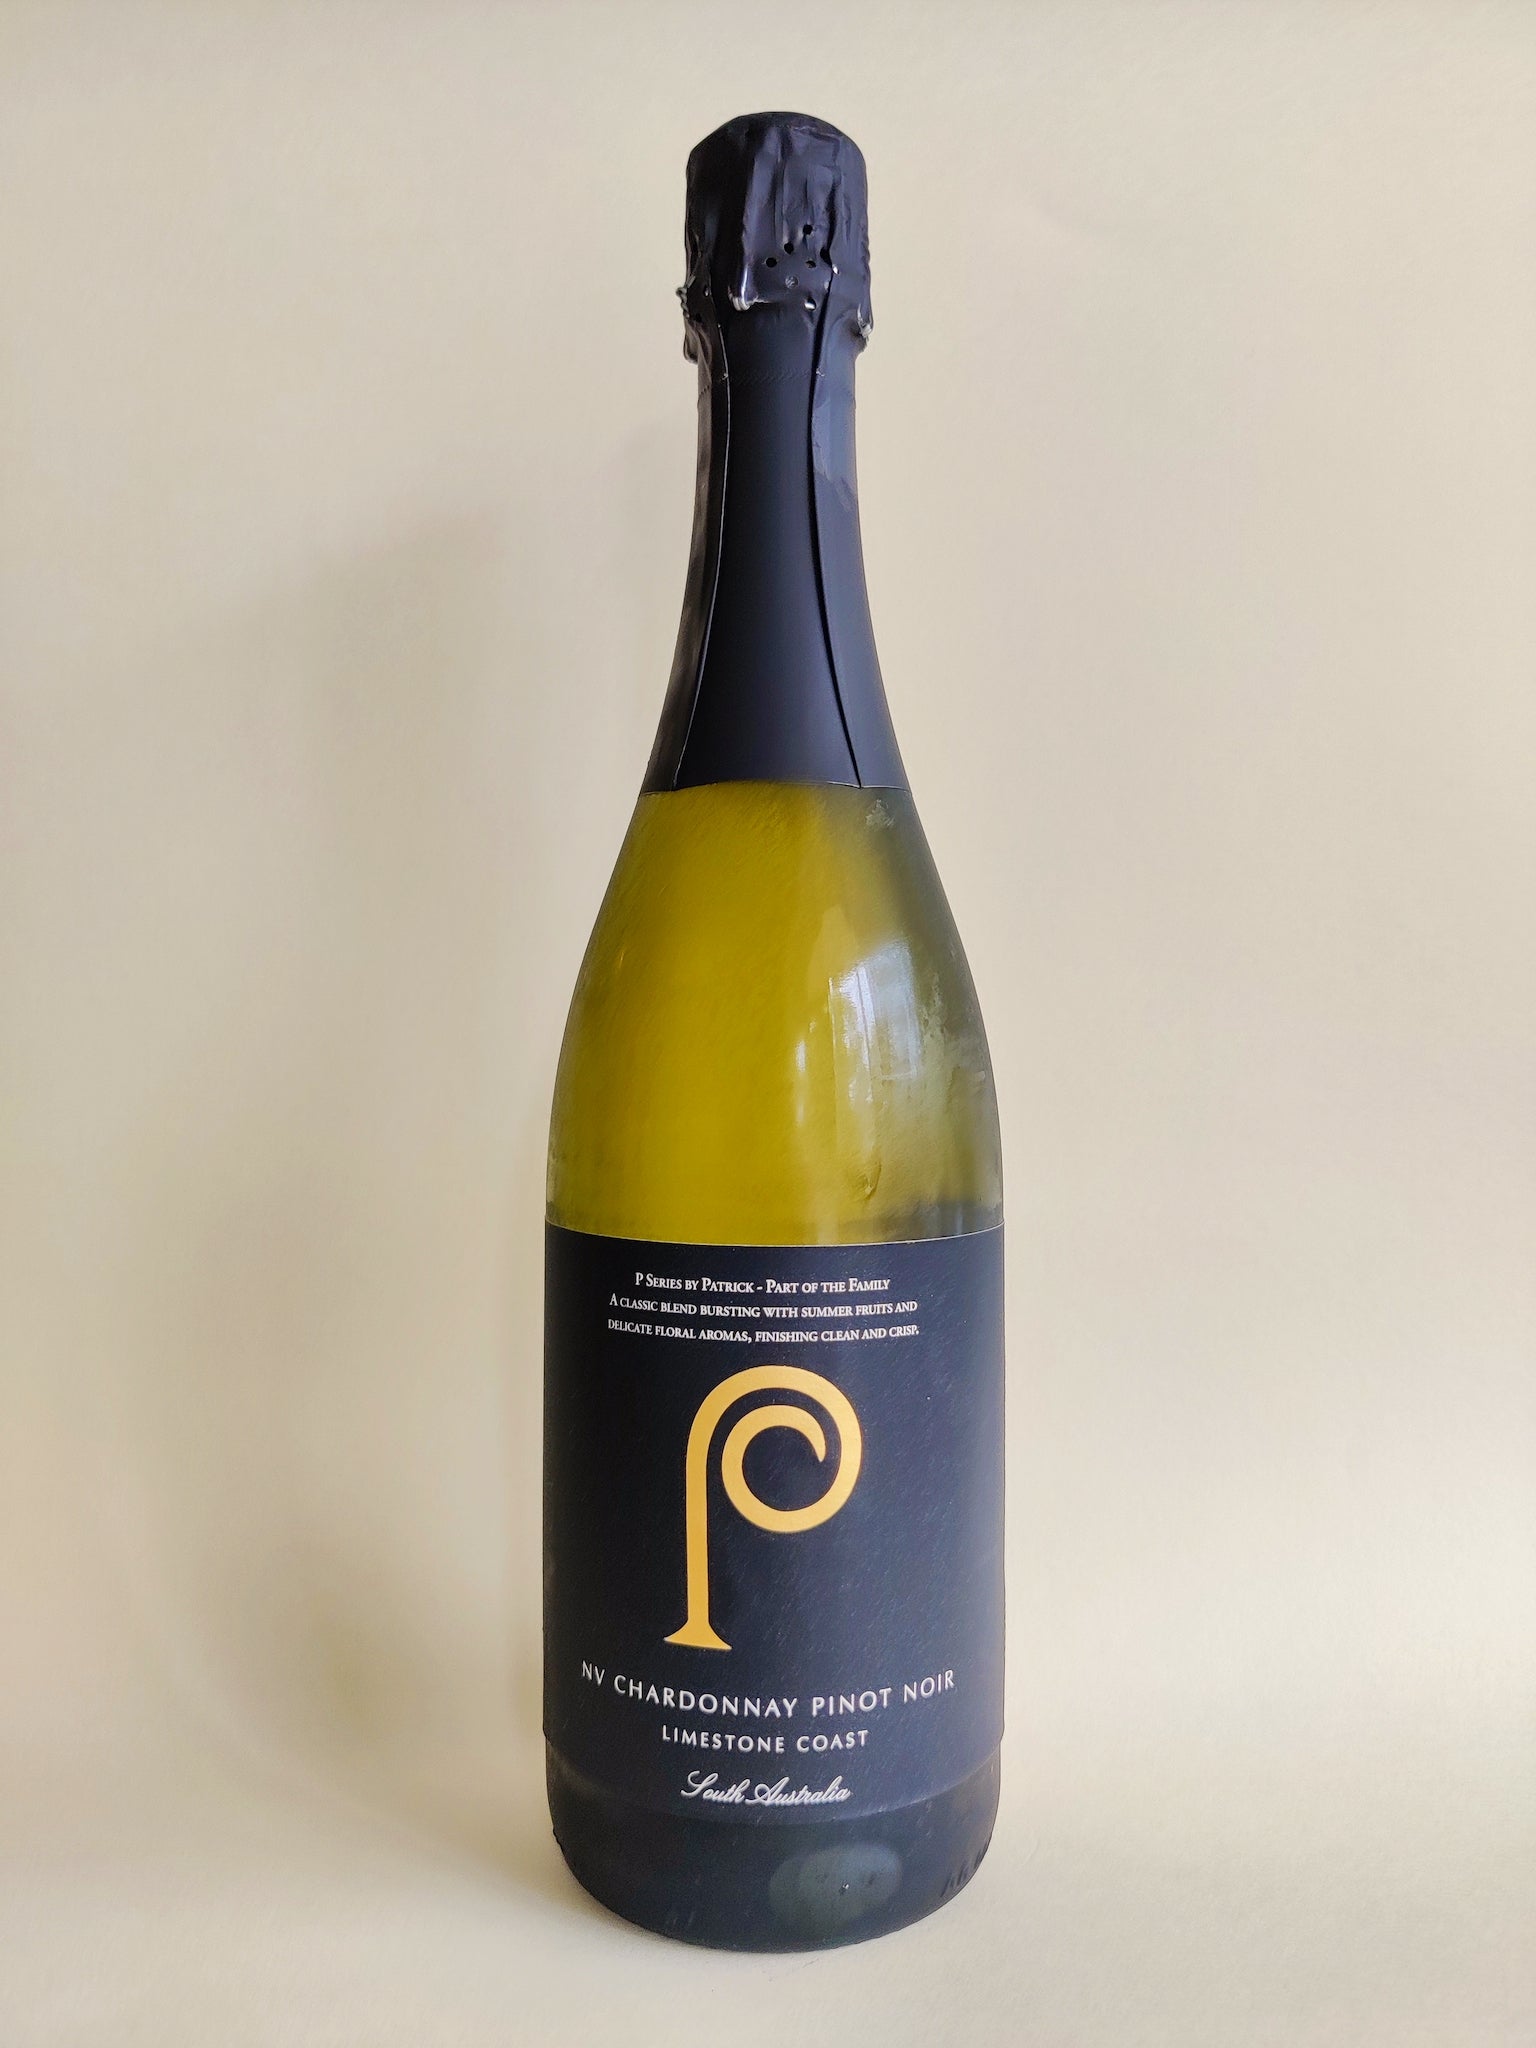 A bottle of Patrick of Coonawarra P-Series sparkling wine from Limestone Coast, South Australia. 